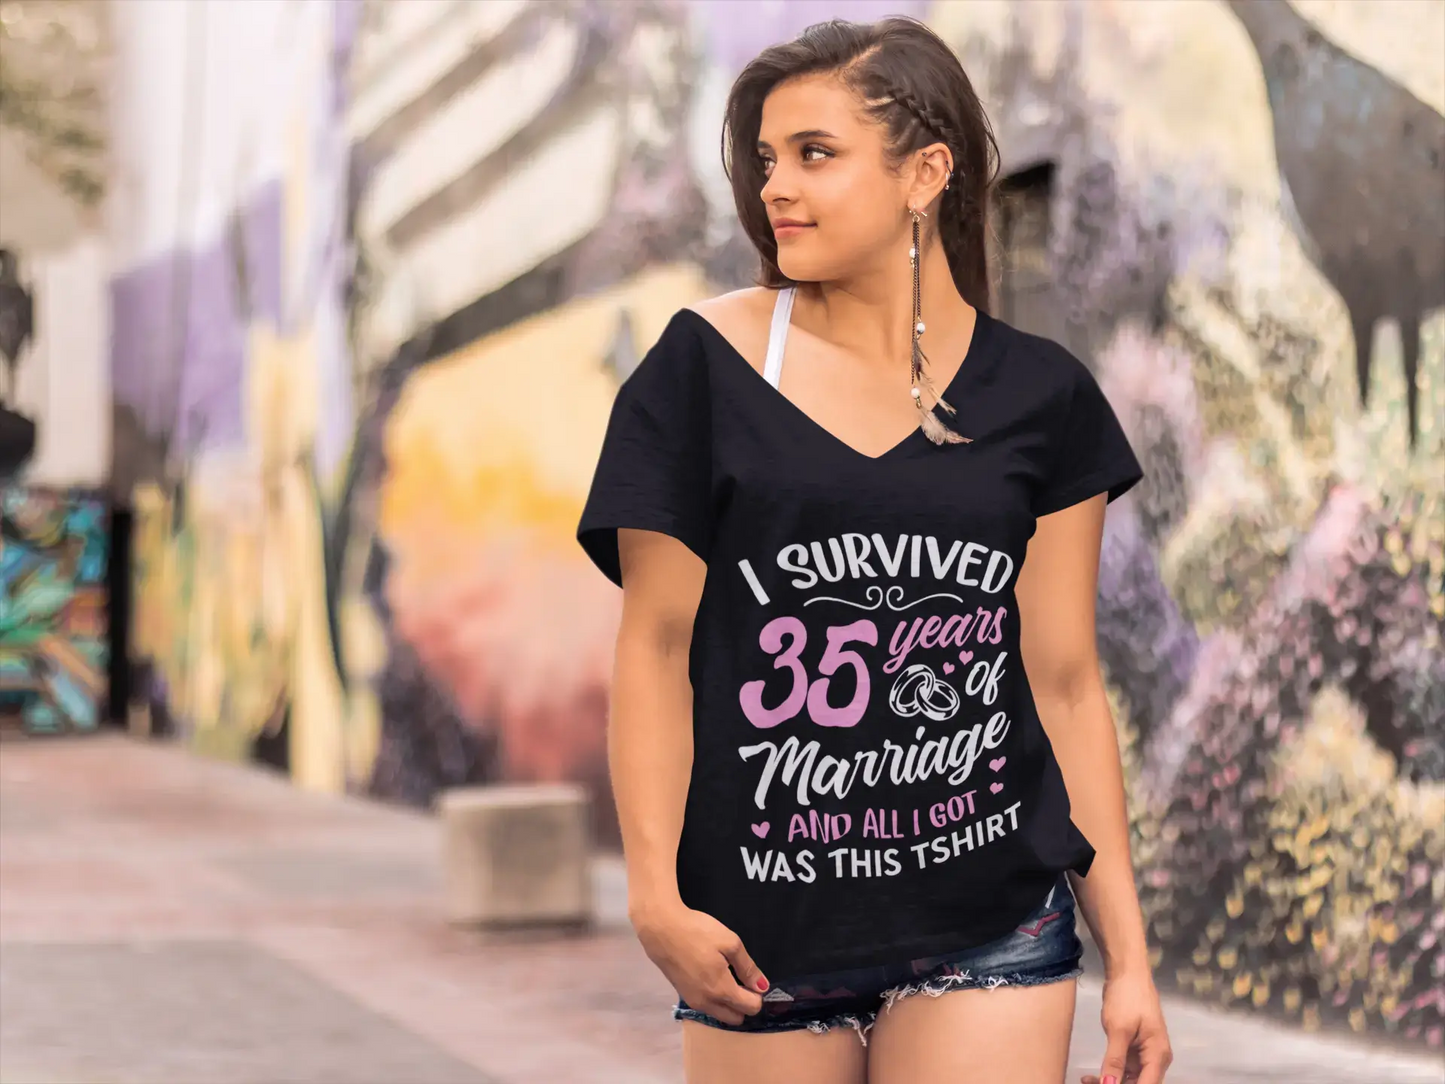 ULTRABASIC Damen-T-Shirt „I Survived 35 Years of Marriage and All I Got is This Tshirt“ – lustiges Jubiläums-T-Shirt